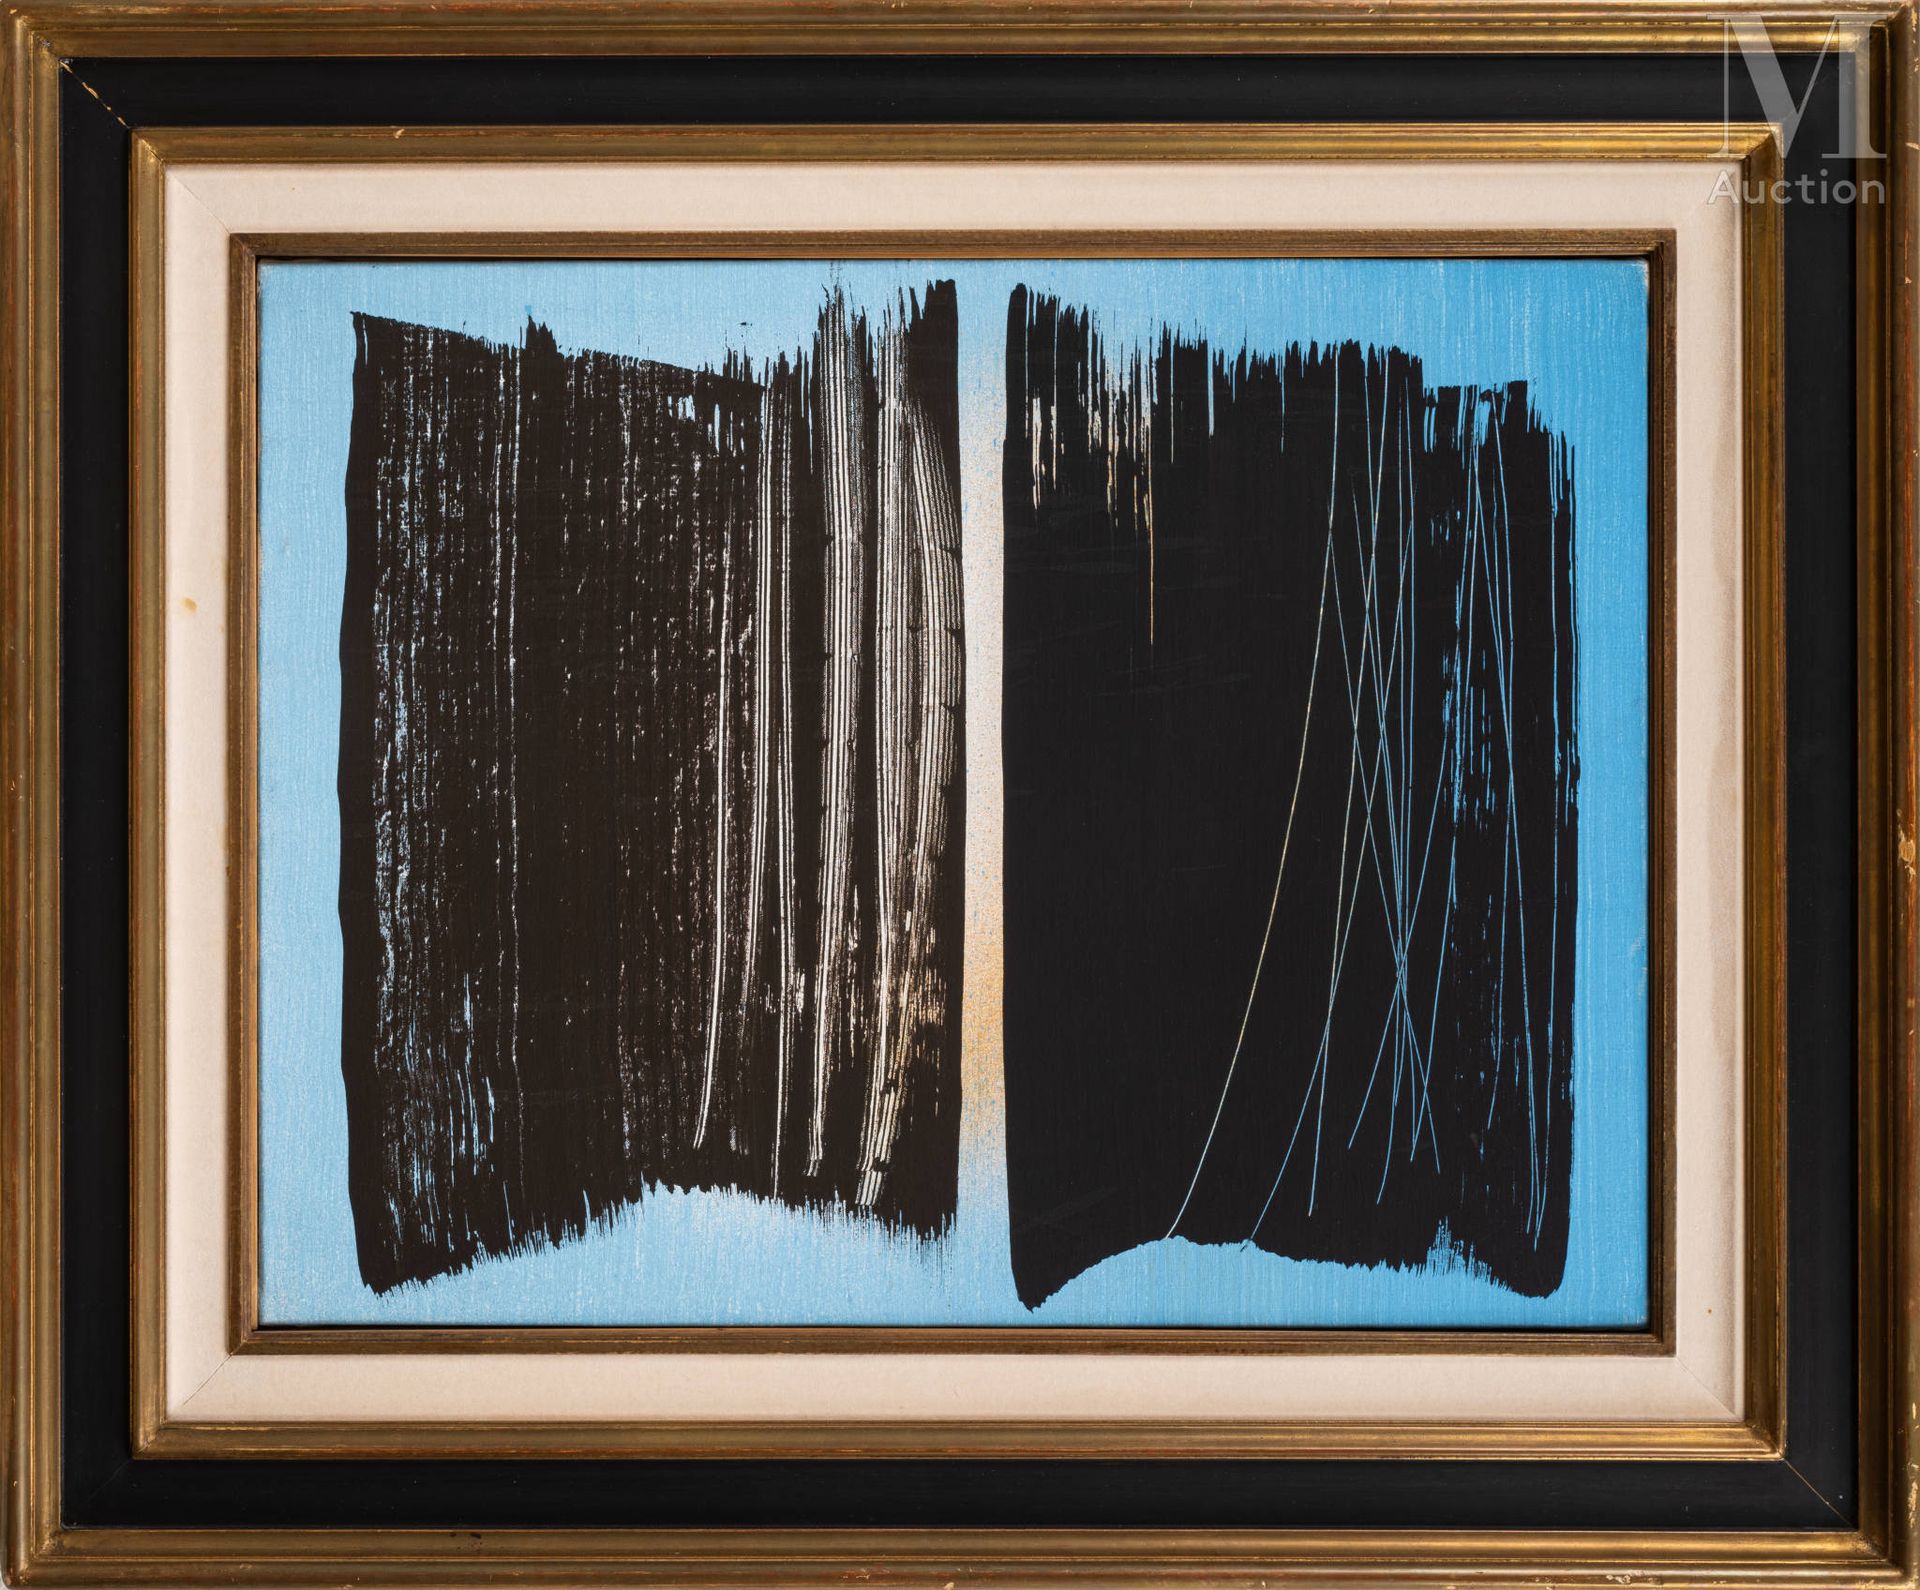 Hans HARTUNG (1904-1989) T1962-U30, 1962

Vinyl on canvas, and bearing the Hans &hellip;